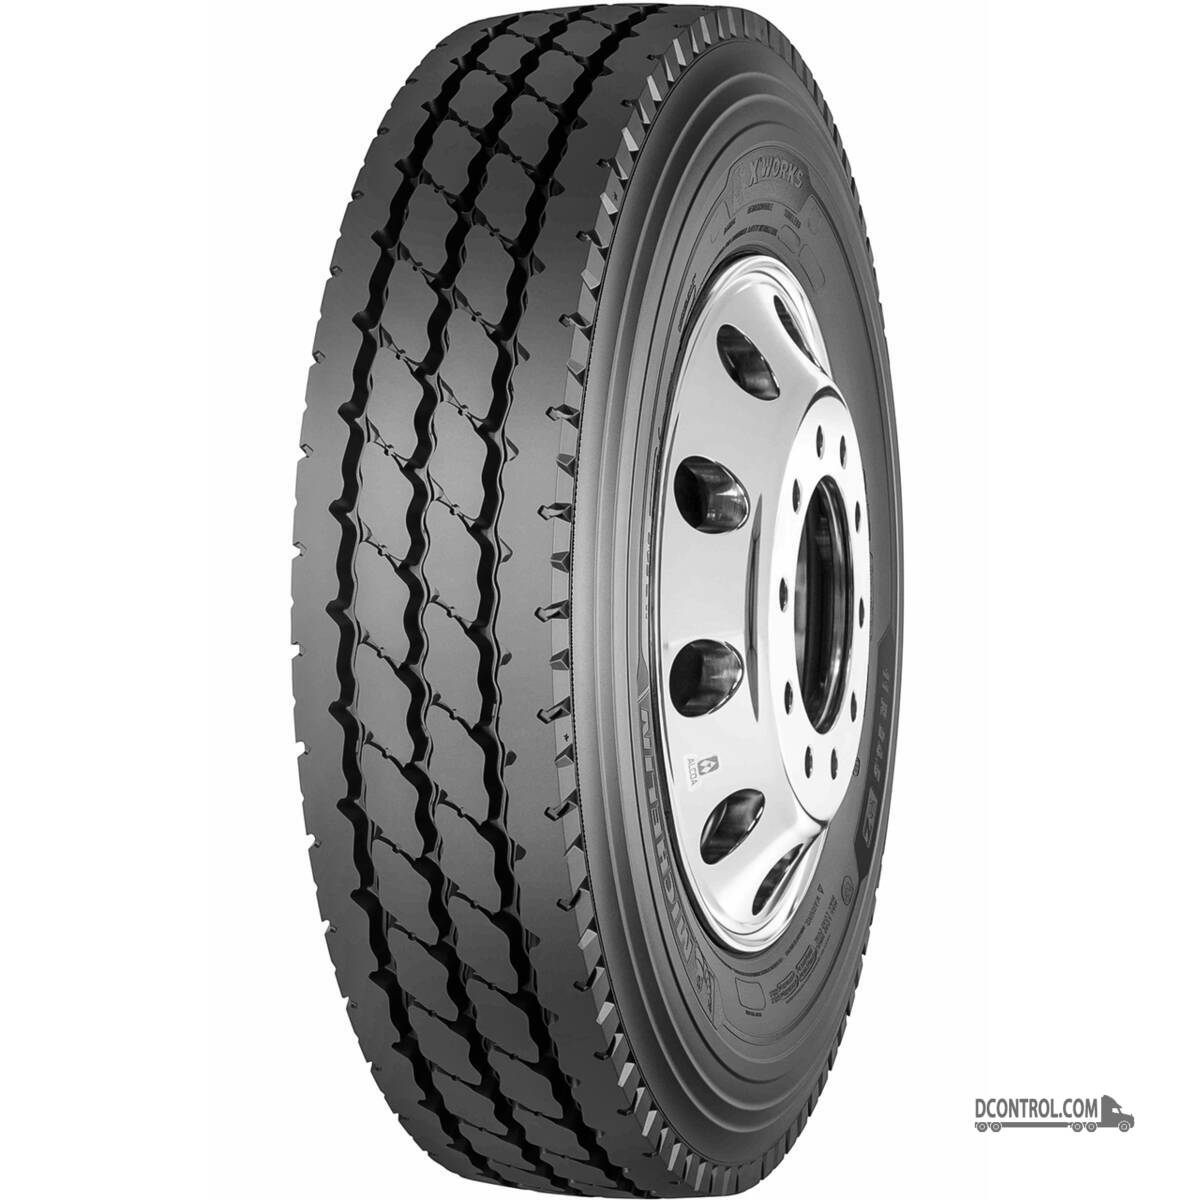 Michelin Michelin X Works Z 12R22.5 H (16 Ply) Highway Tire